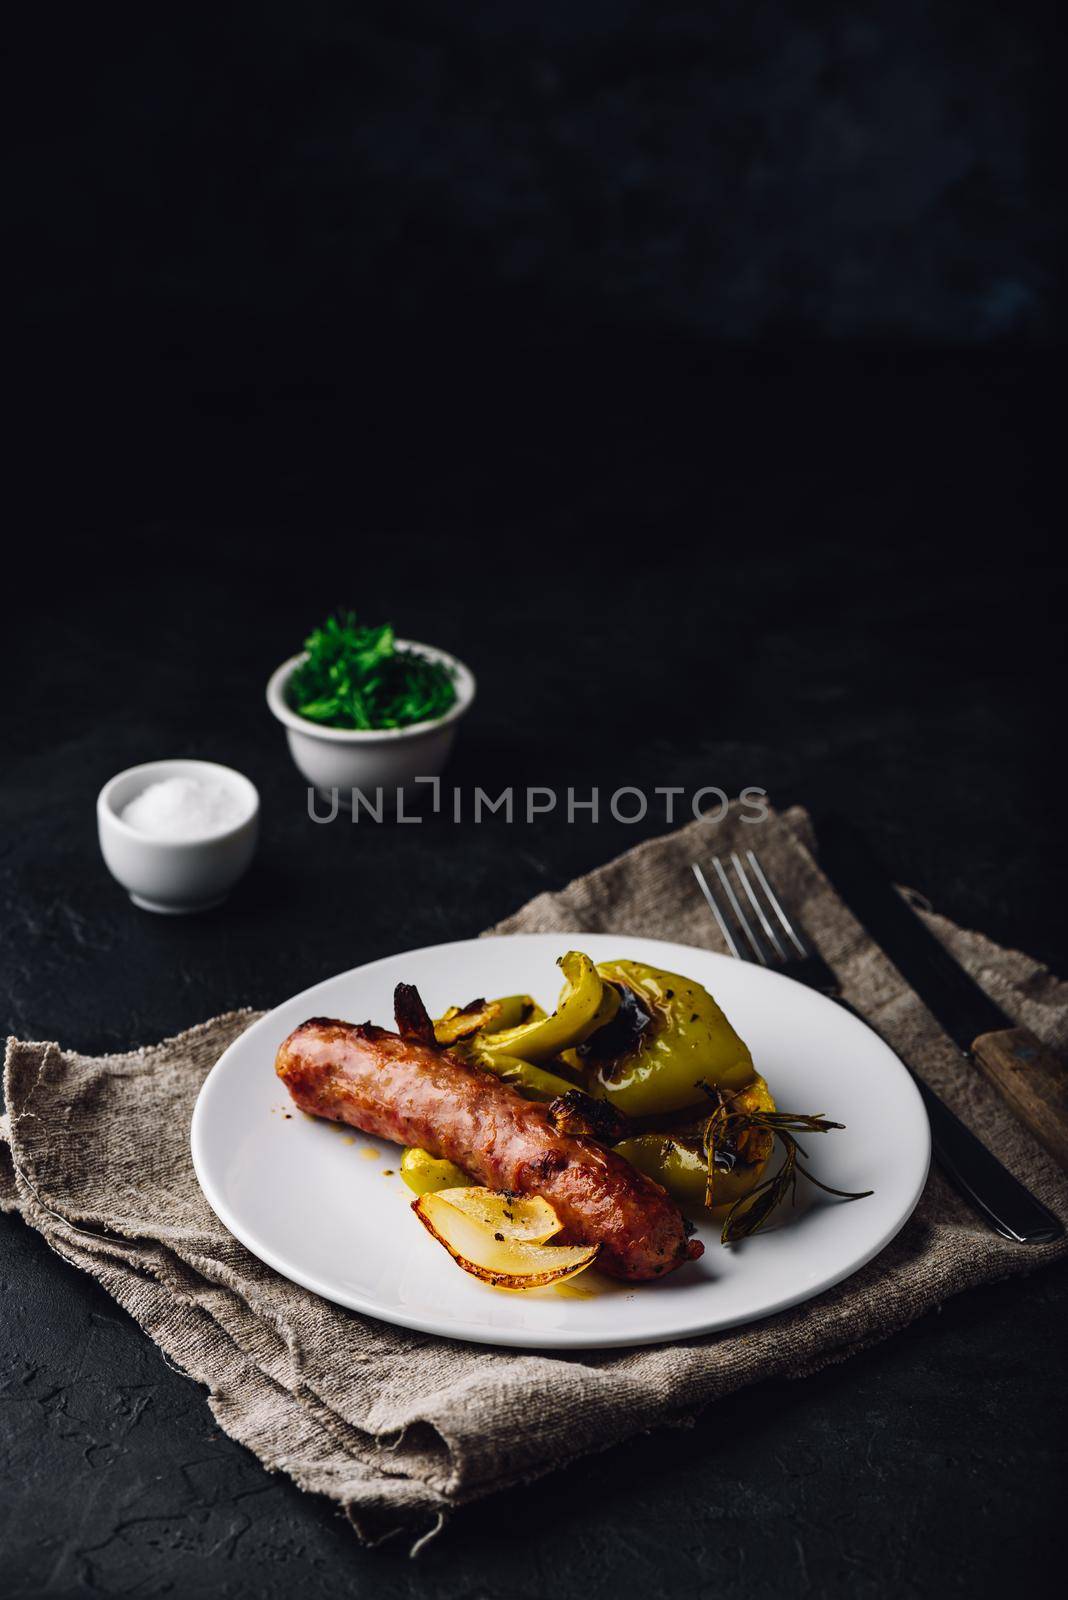 Oven baked pork sausage with green bell peppers, onion and herbs by Seva_blsv